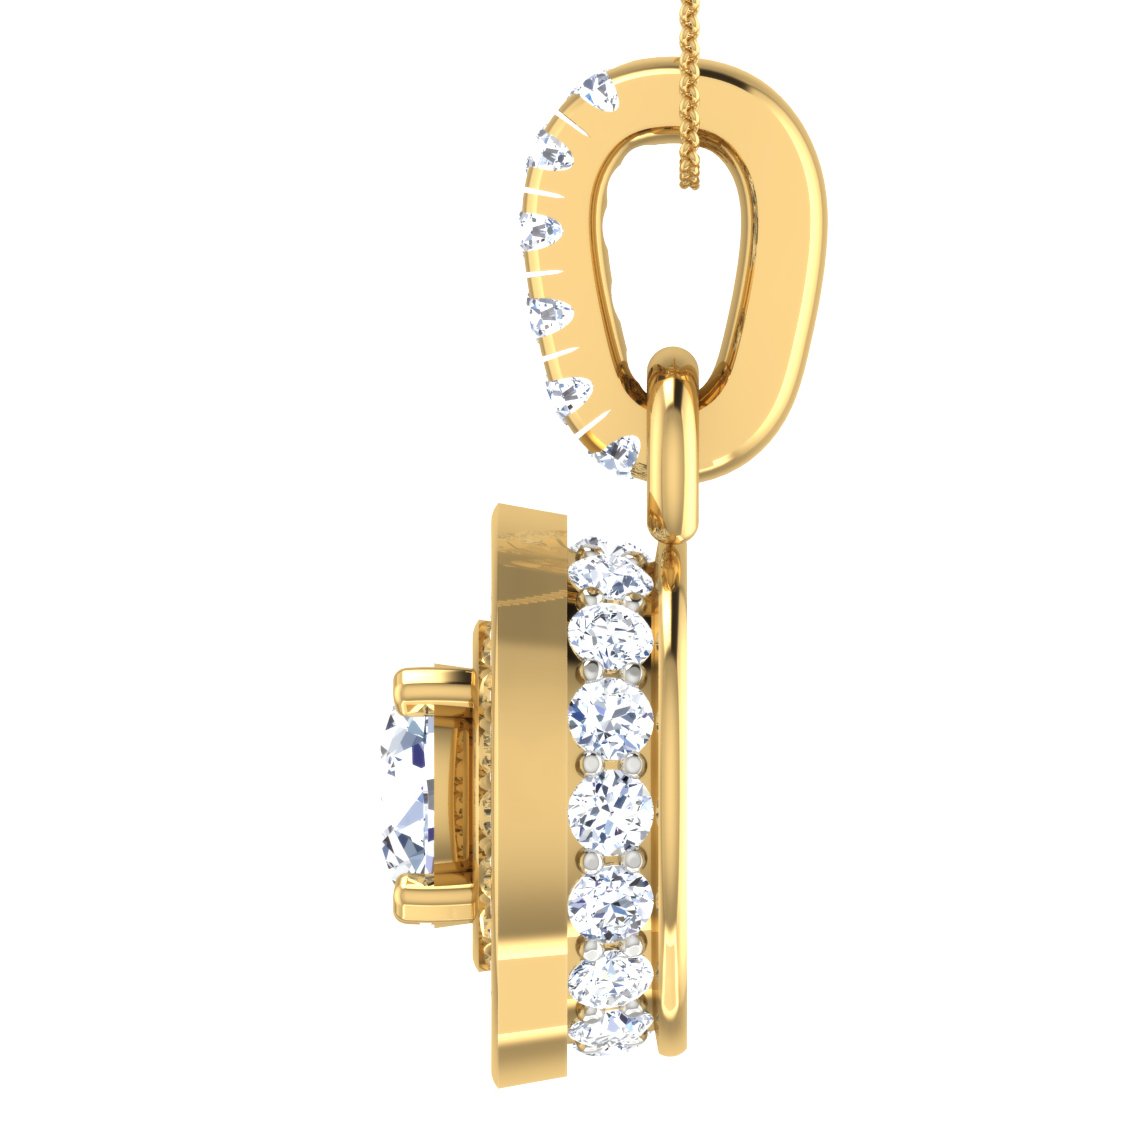 Frame Of Fame Diamond Pendant In Pure Gold By Dhanji Jewels